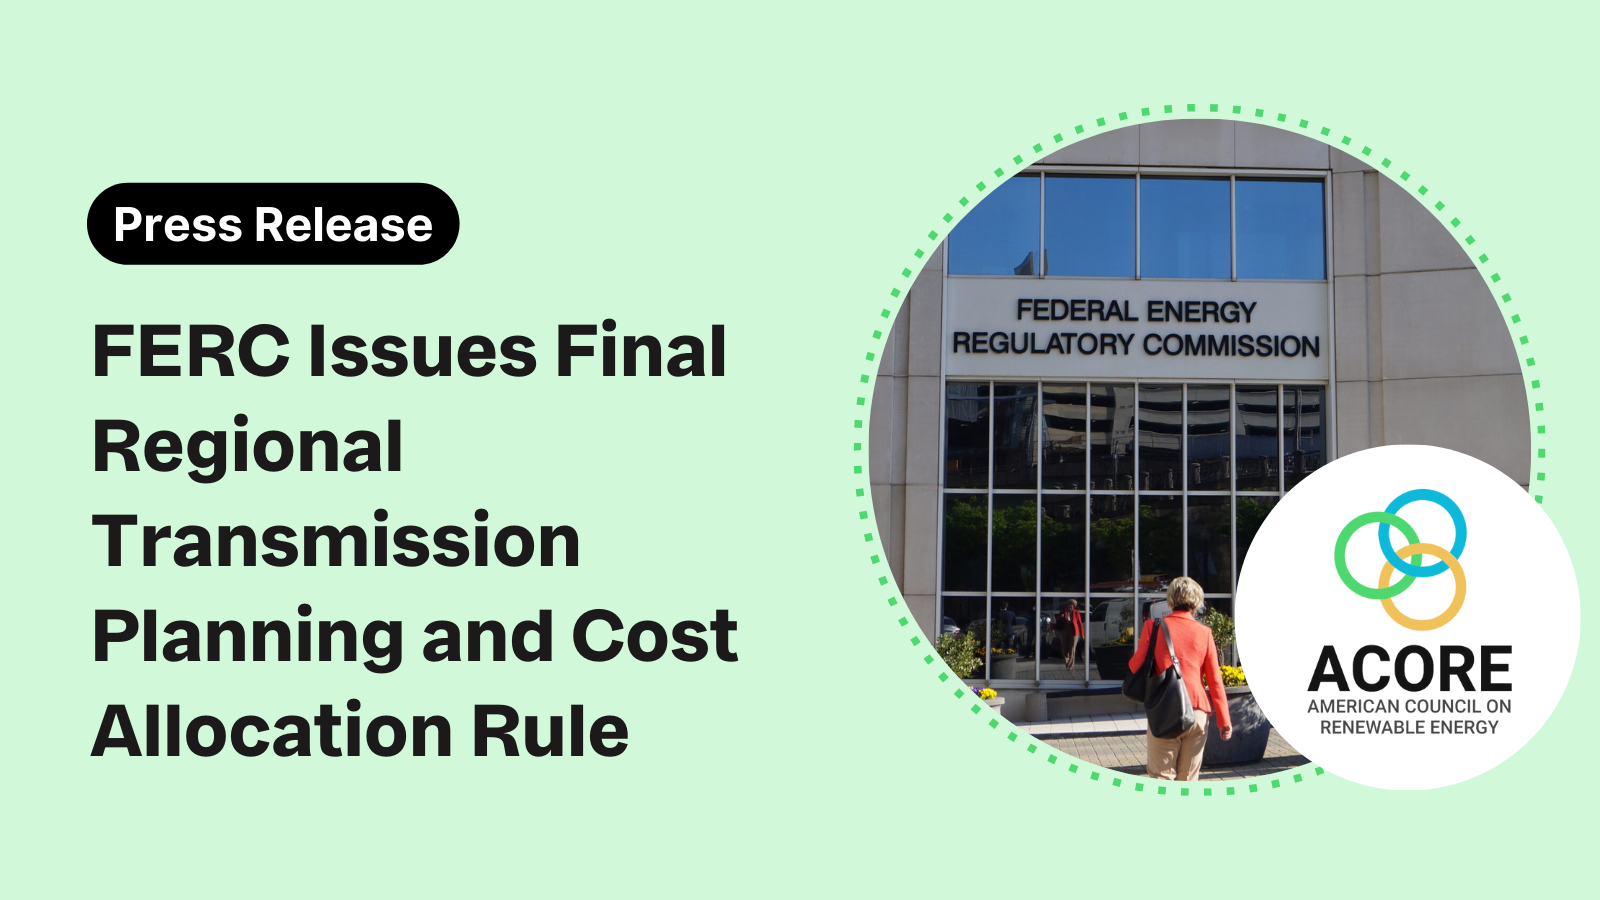 FERC Issues Final Regional Transmission Planning and Cost Allocation Rule